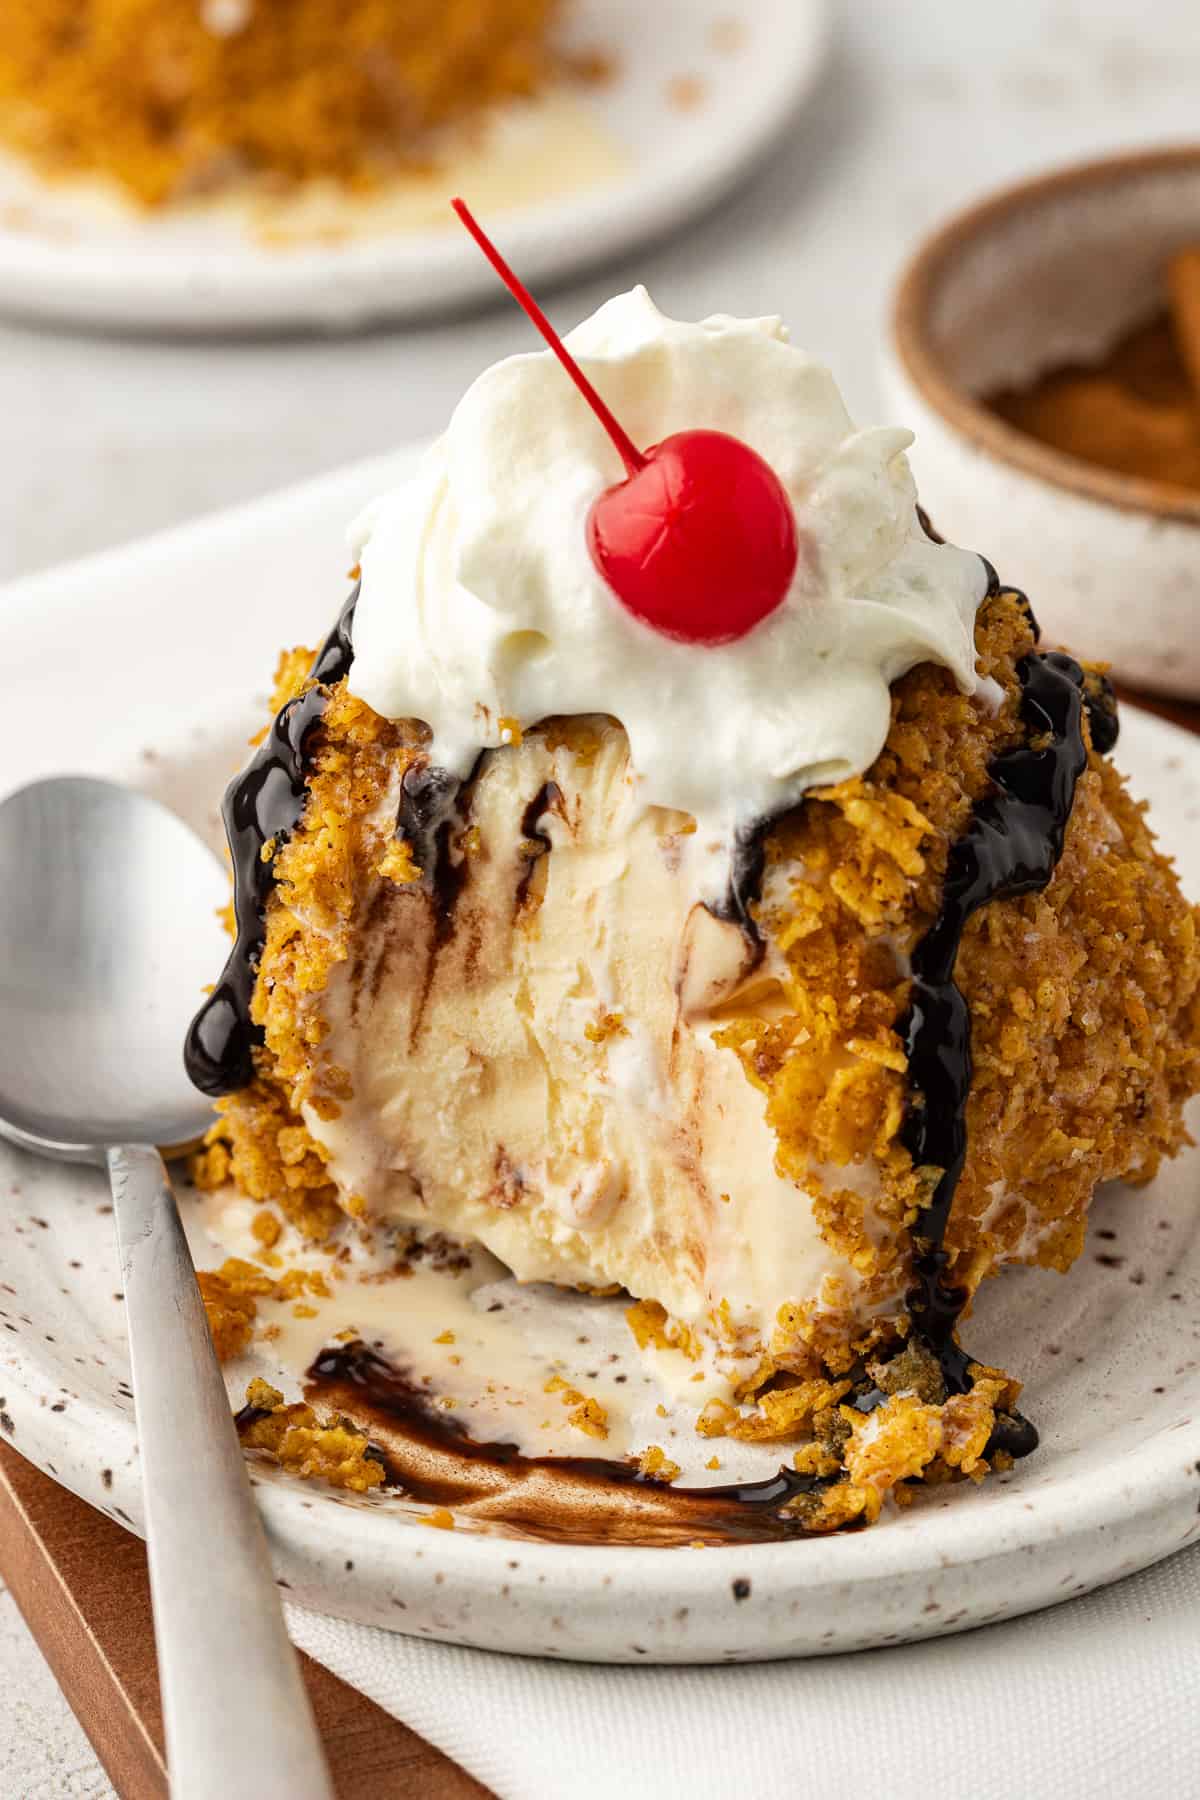 a ball of fried ice cream topping with chocolate syrup, whipped cream and a cherry on a small plate with a spoon and a bite missing from the ice cream